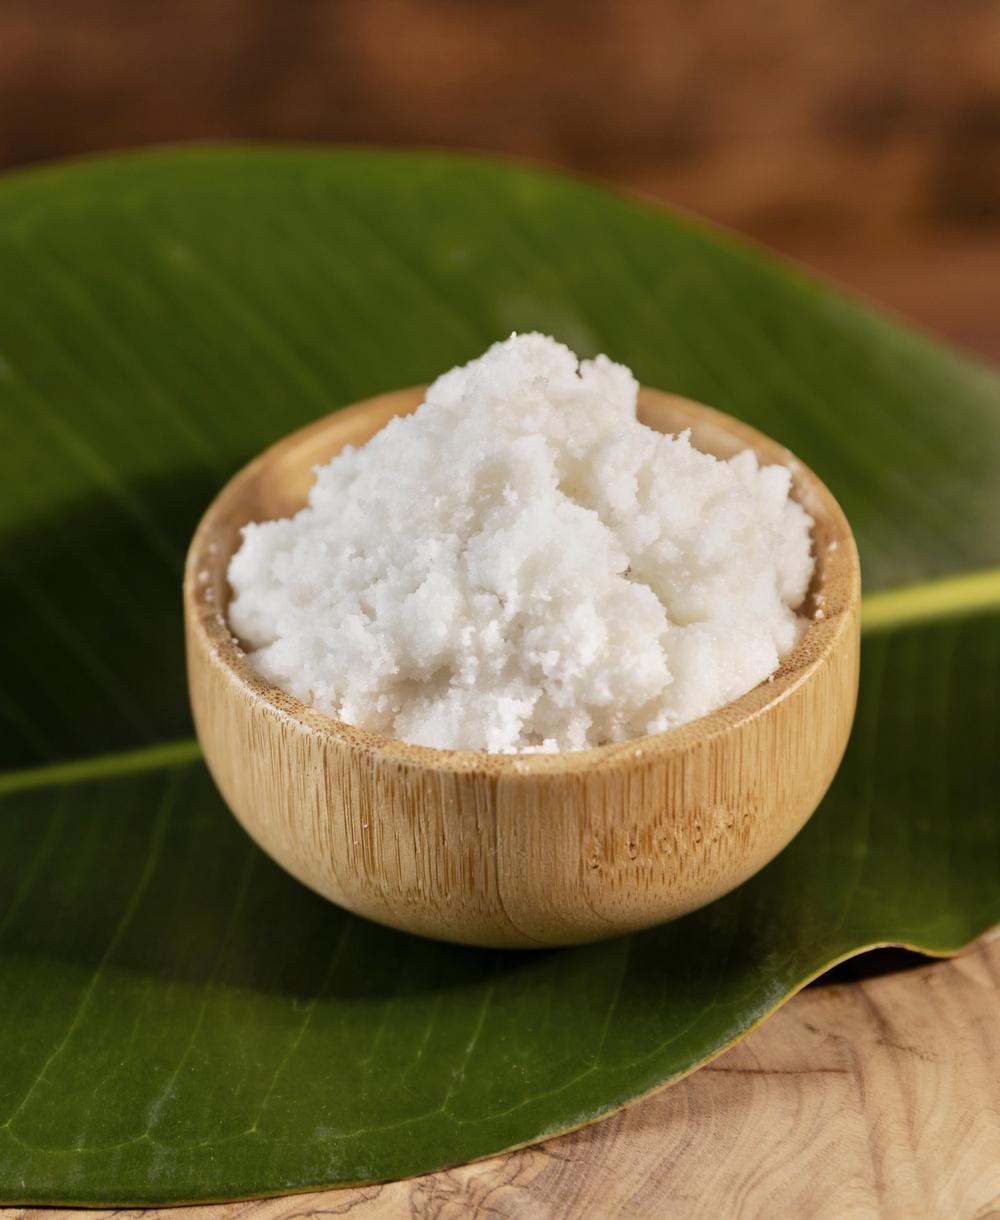 Shea Butter Benefits for Hair and 5 Recipes to Try